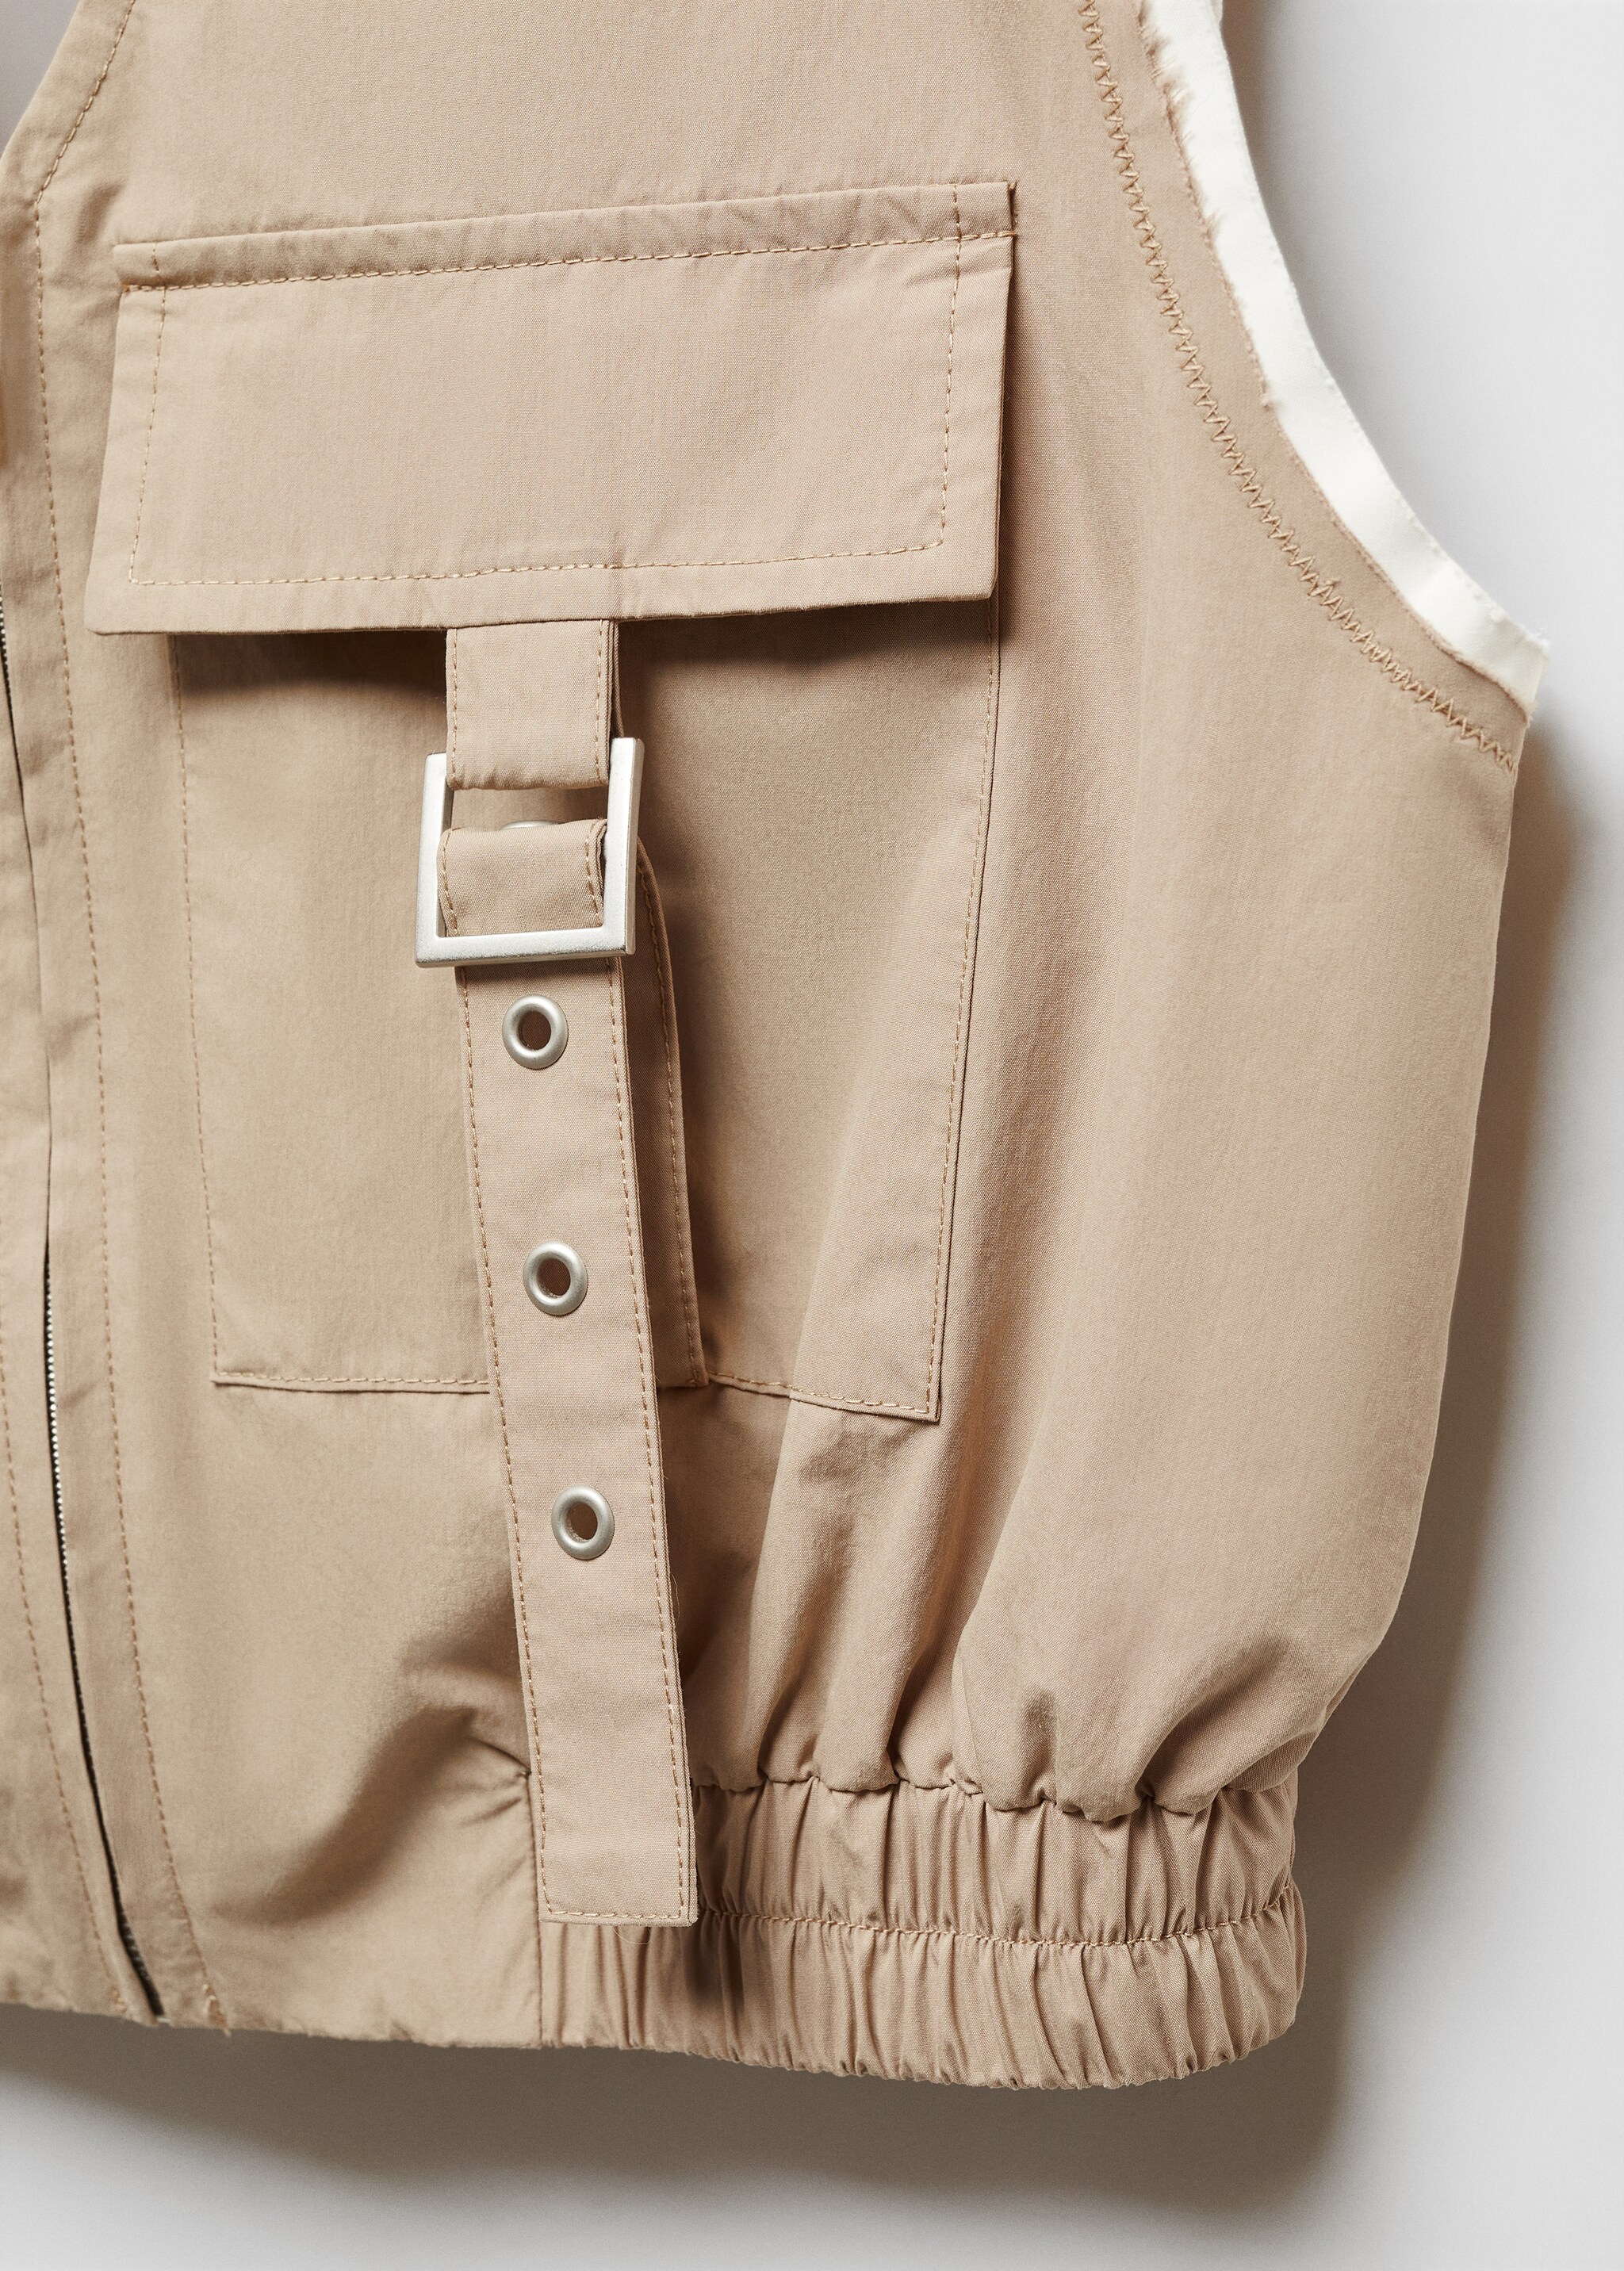 Vest with cargo pockets - Details of the article 8